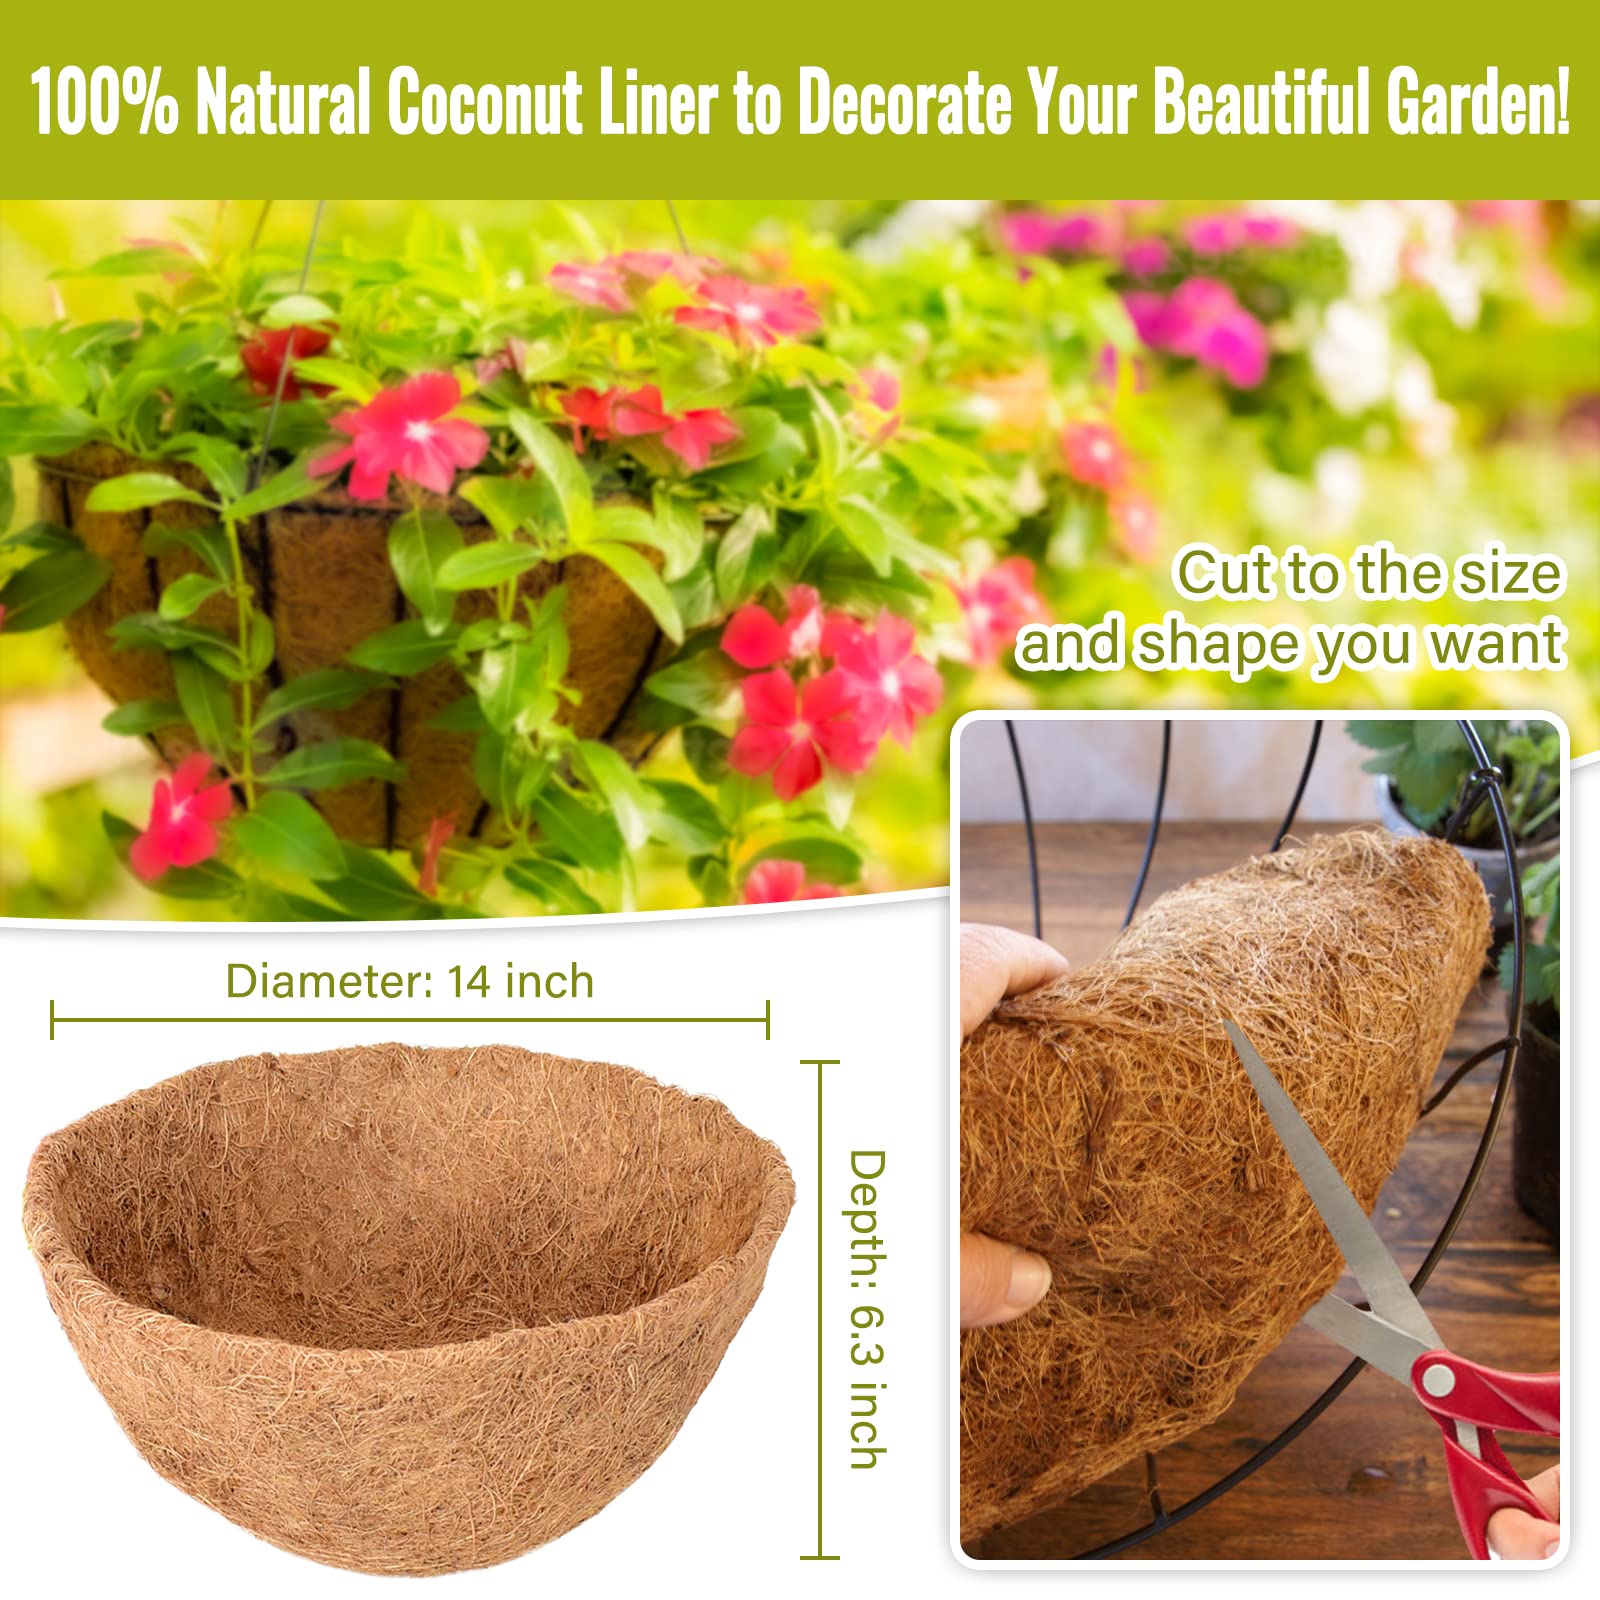 Legigo 6 Pack 14 Inch Hanging Basket Coco Liners Replacement, 100% Natural Round Coconut Coco Fiber Planter Basket Liners for Hanging Basket Flowers/Vegetables